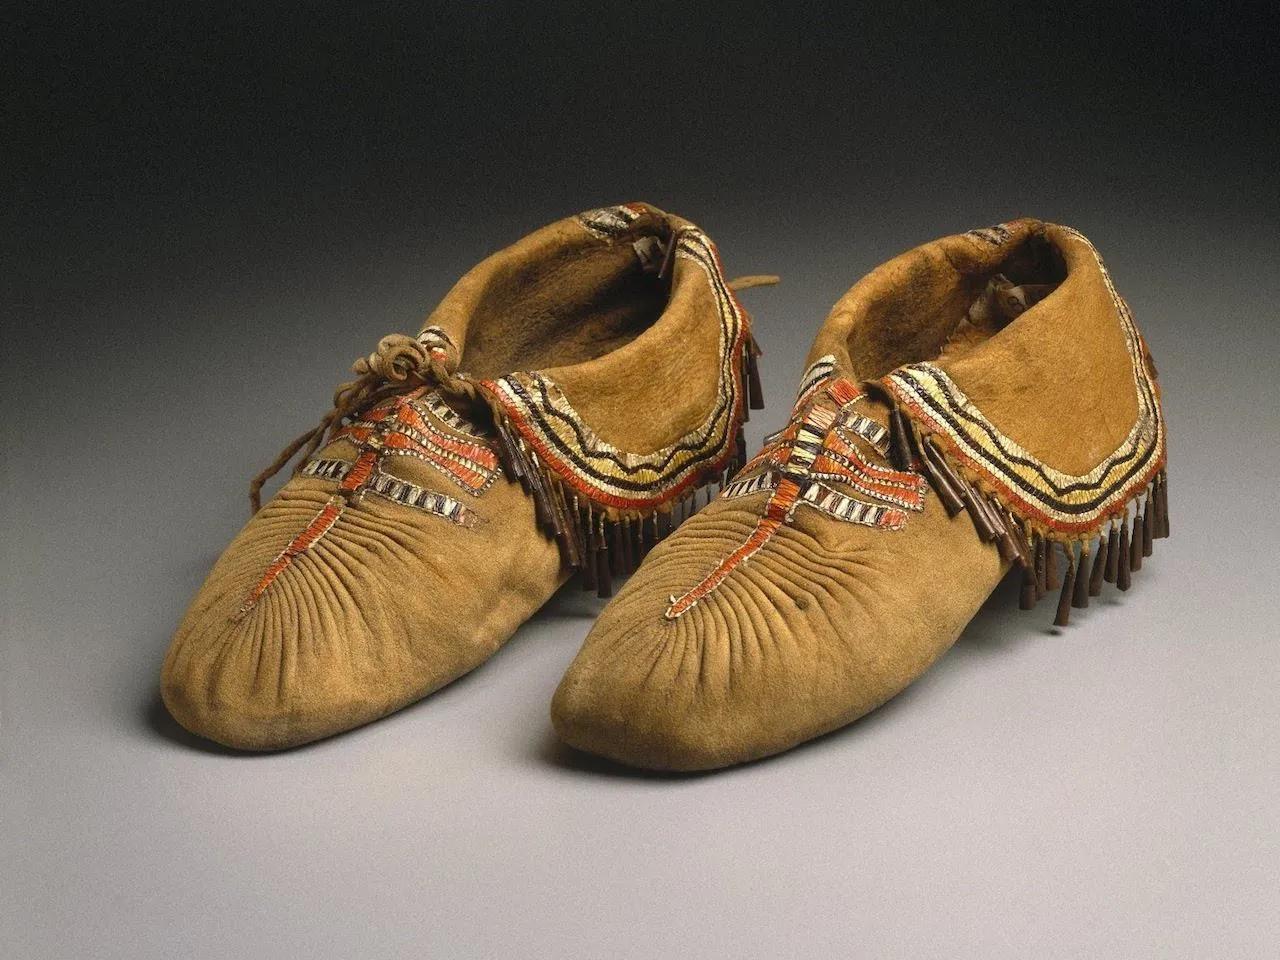 Moccasins - The Fashion and Race Database™